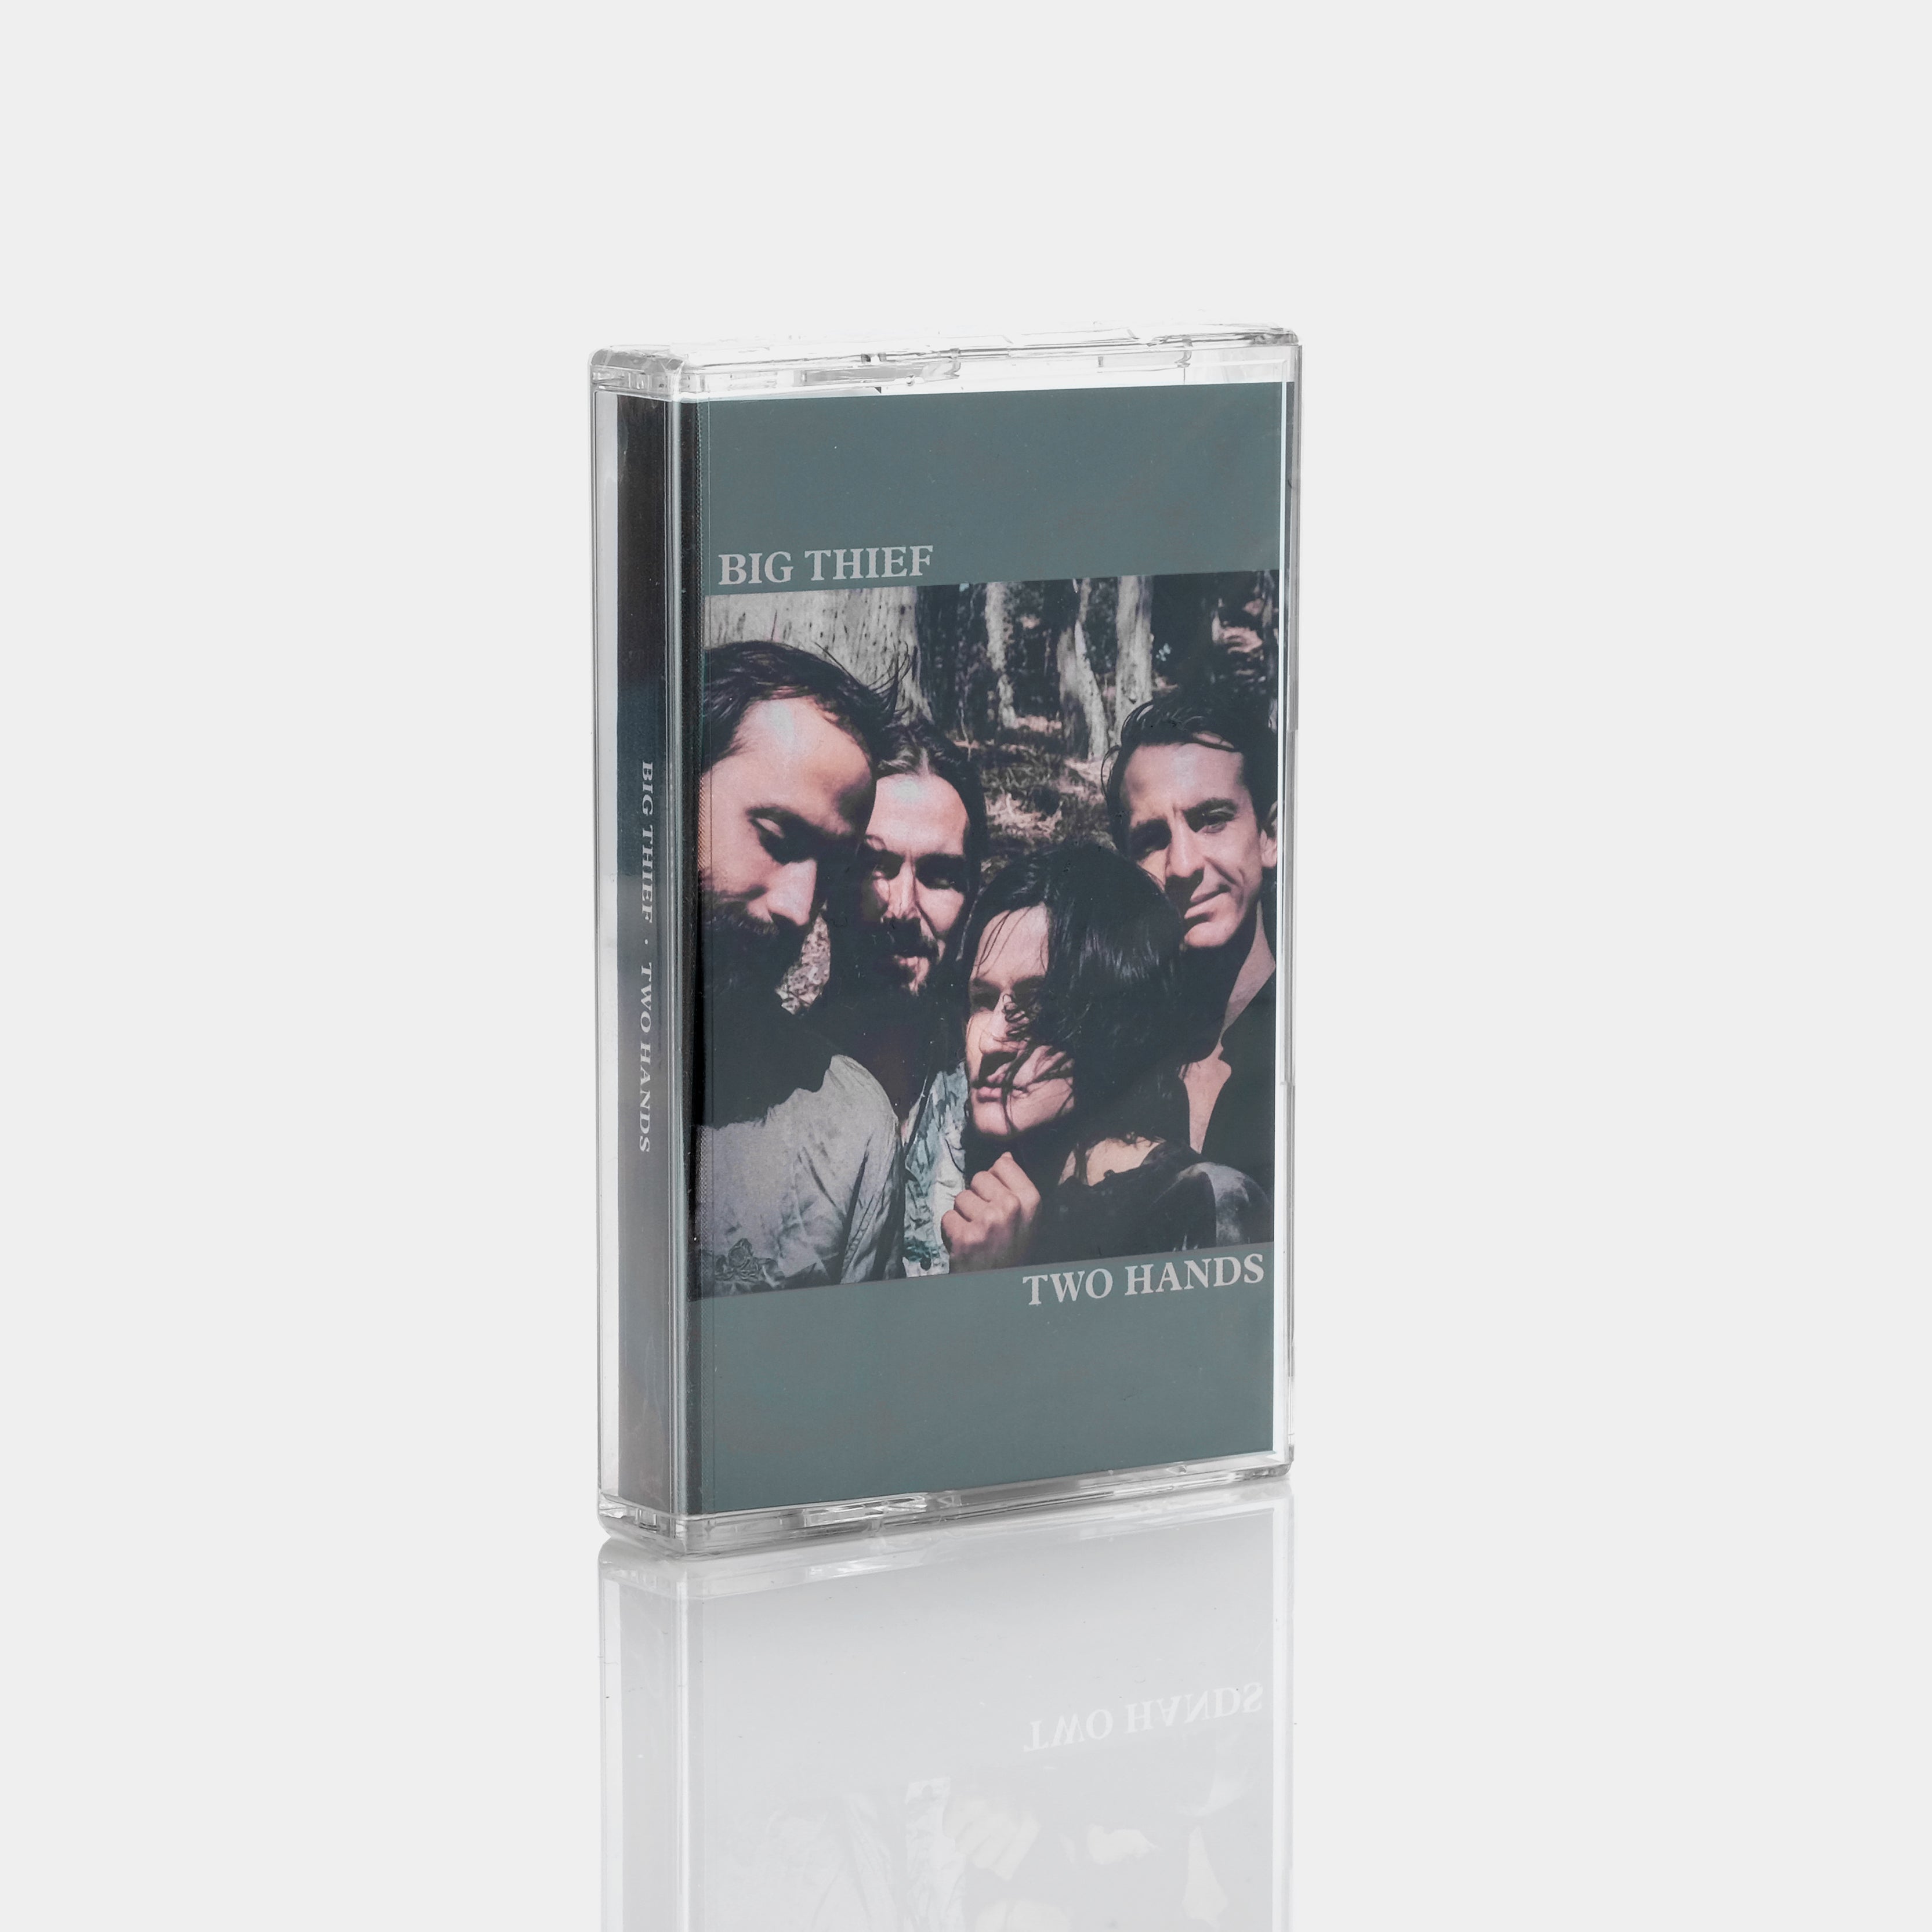 Big Thief - Two Hands Cassette Tape